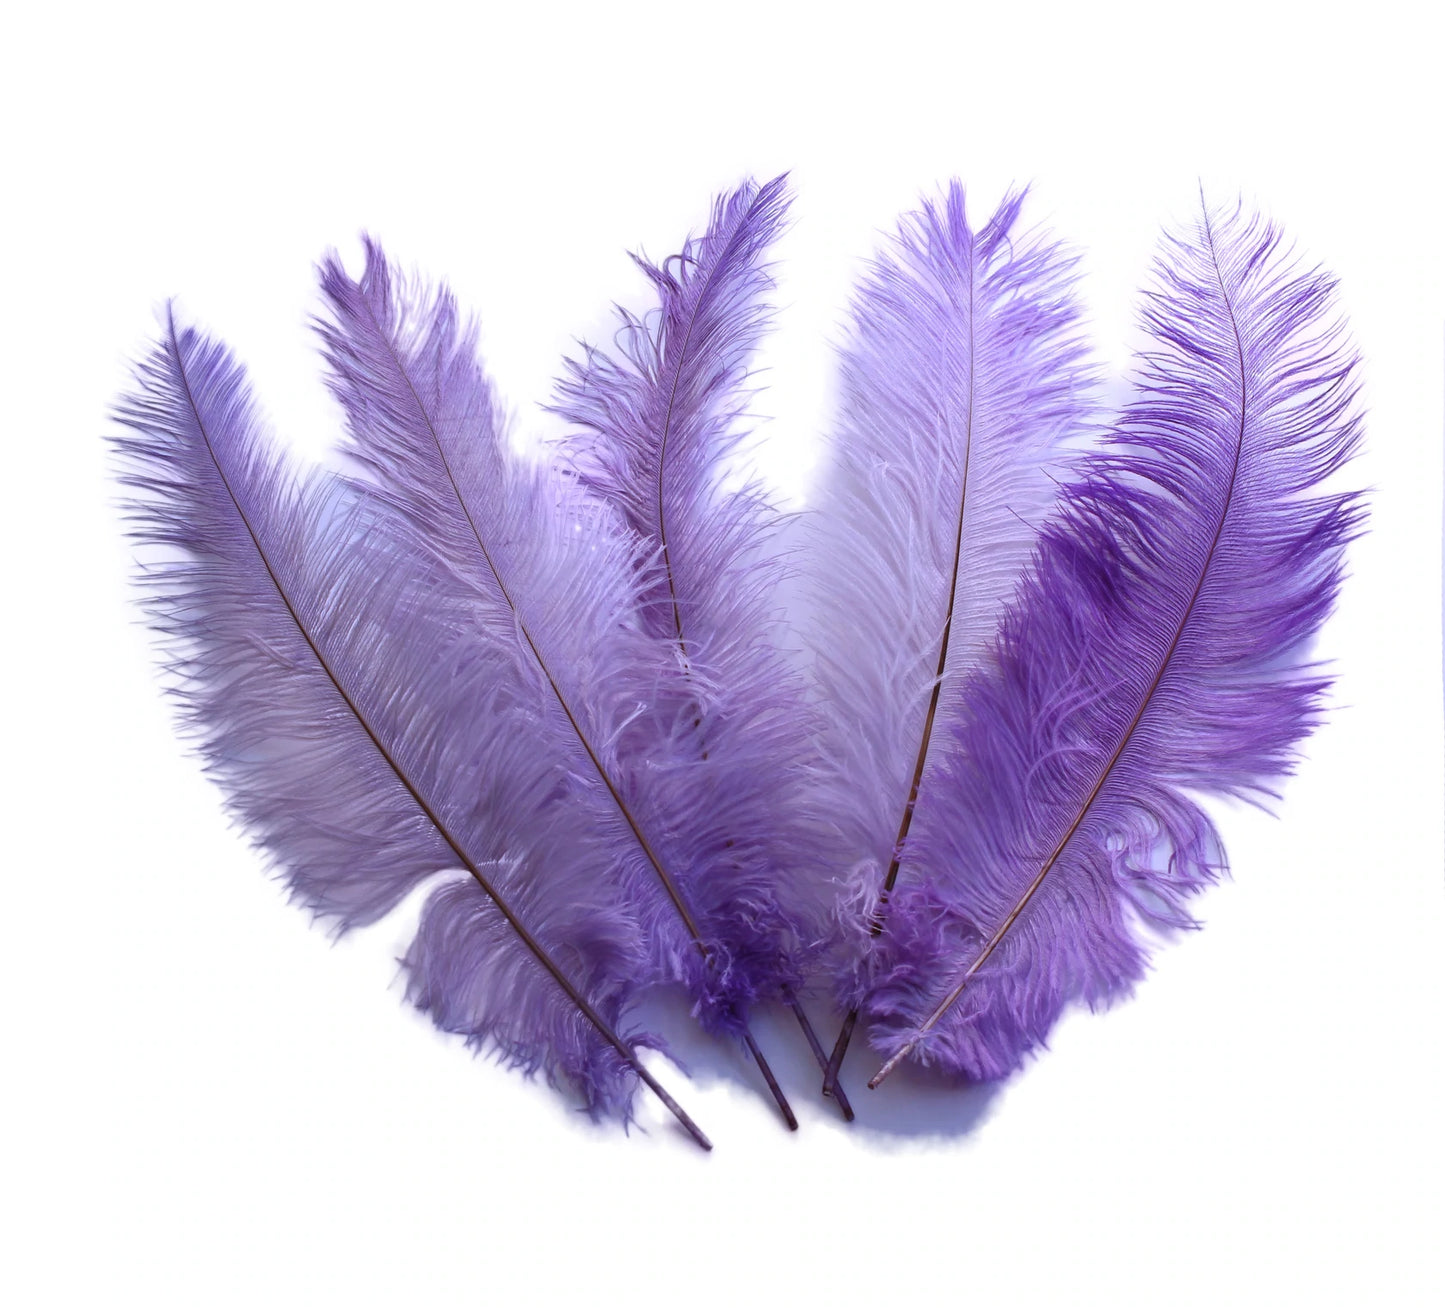 Ostrich Feather Spad Plumes 15-18" (Lavender) - Buy Ostrich Feathers